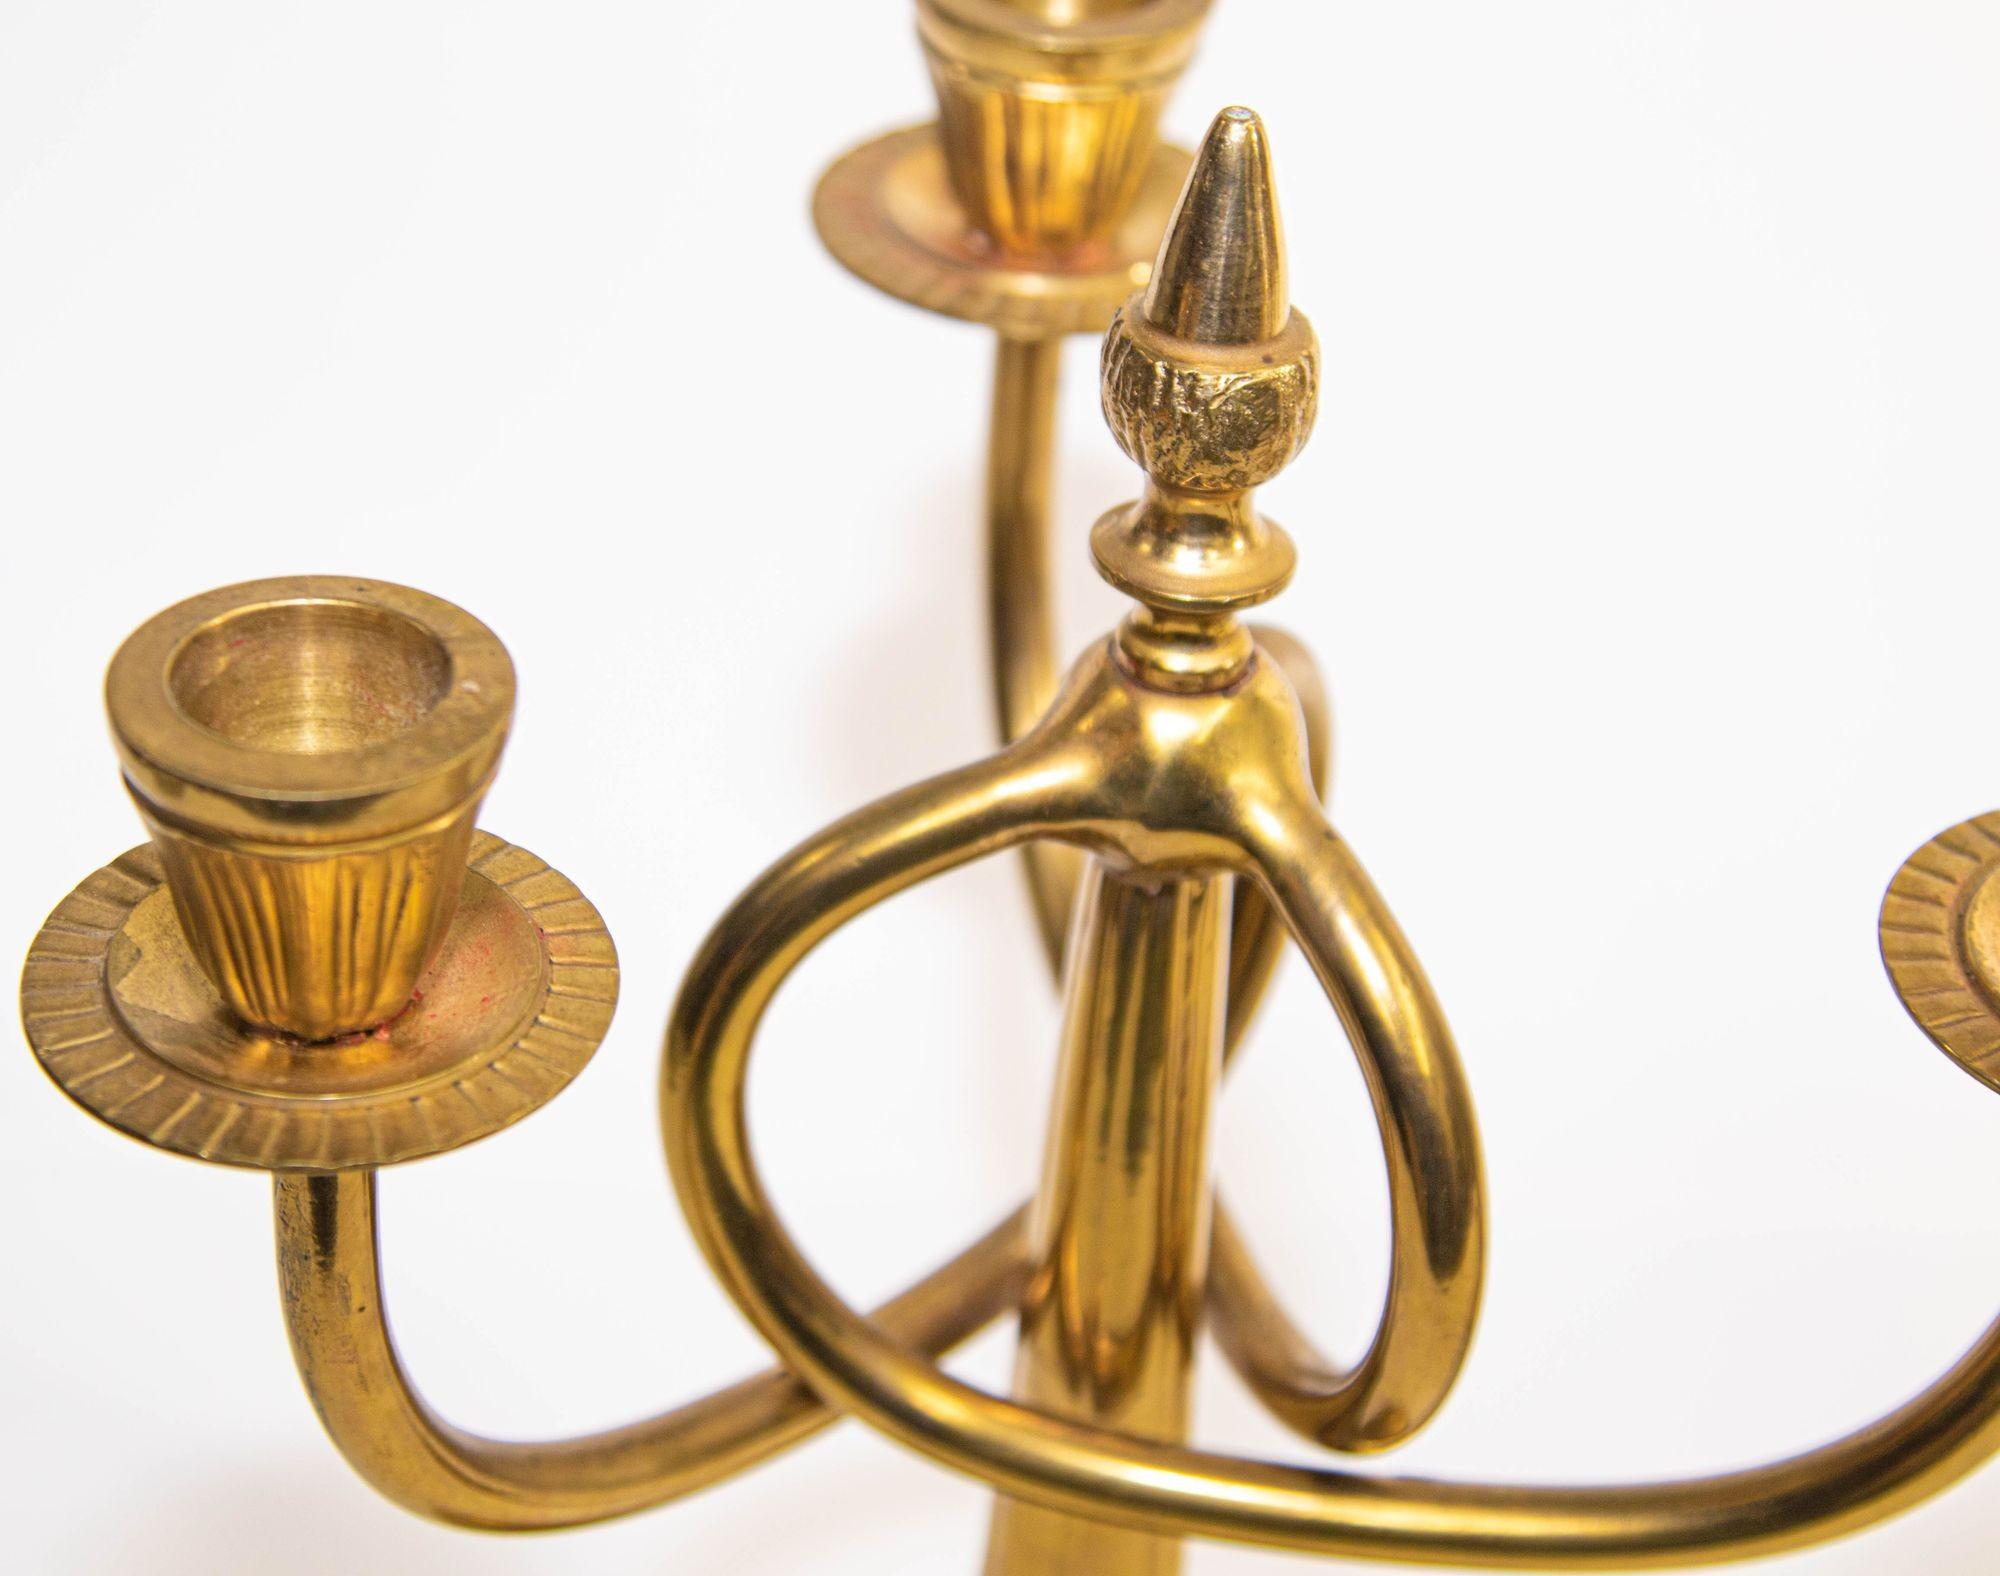 20th Century Vintage Pair of Brass Art Nouveau Candelabras with 3 Branches, c.1950